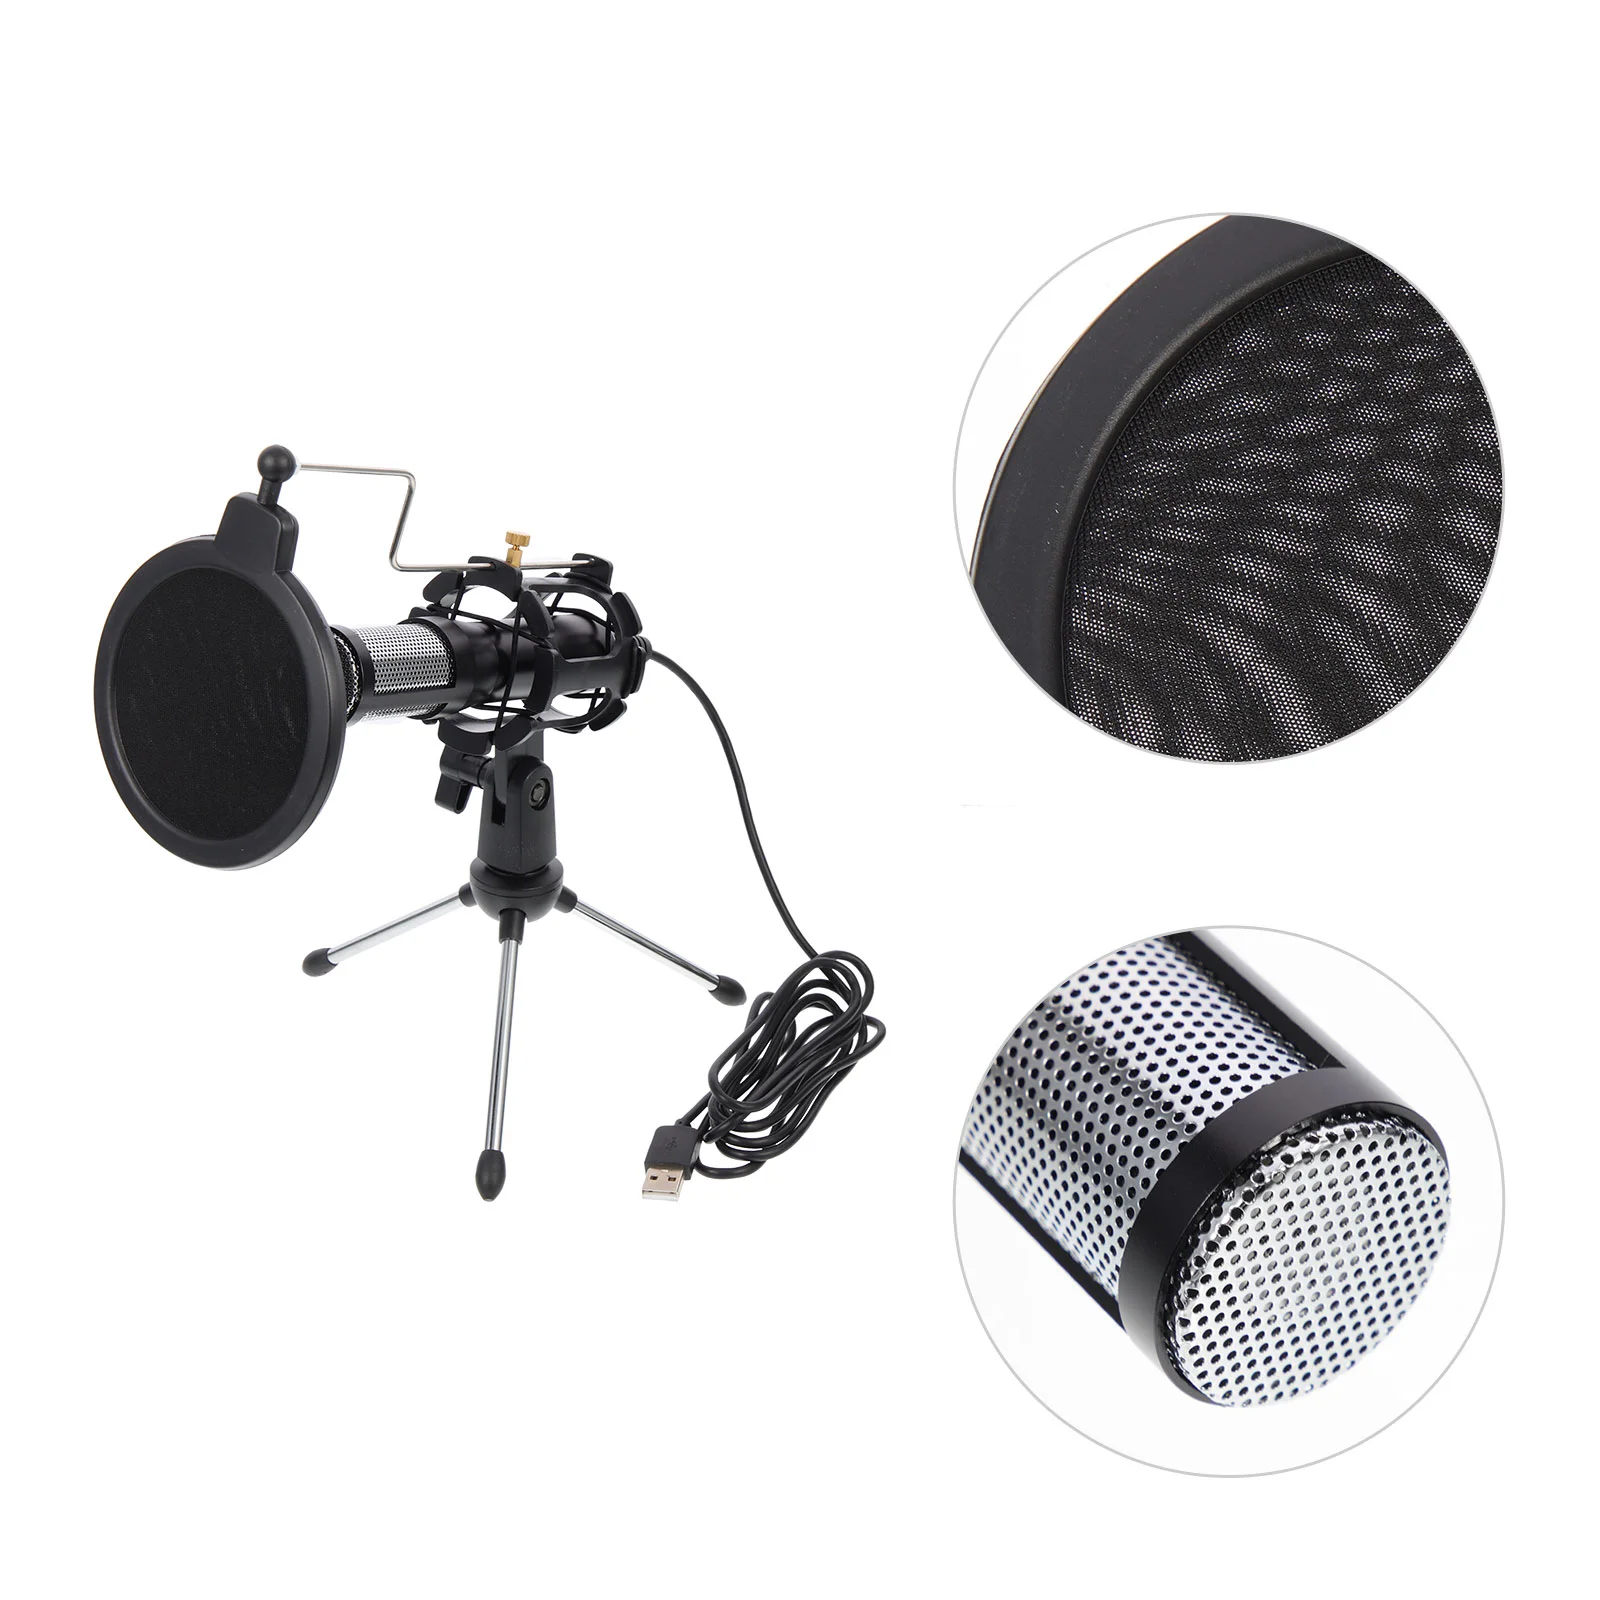 

Microphone Condenser Mic Usb Gamingnoise Reduction Home Game Set Conference Professional